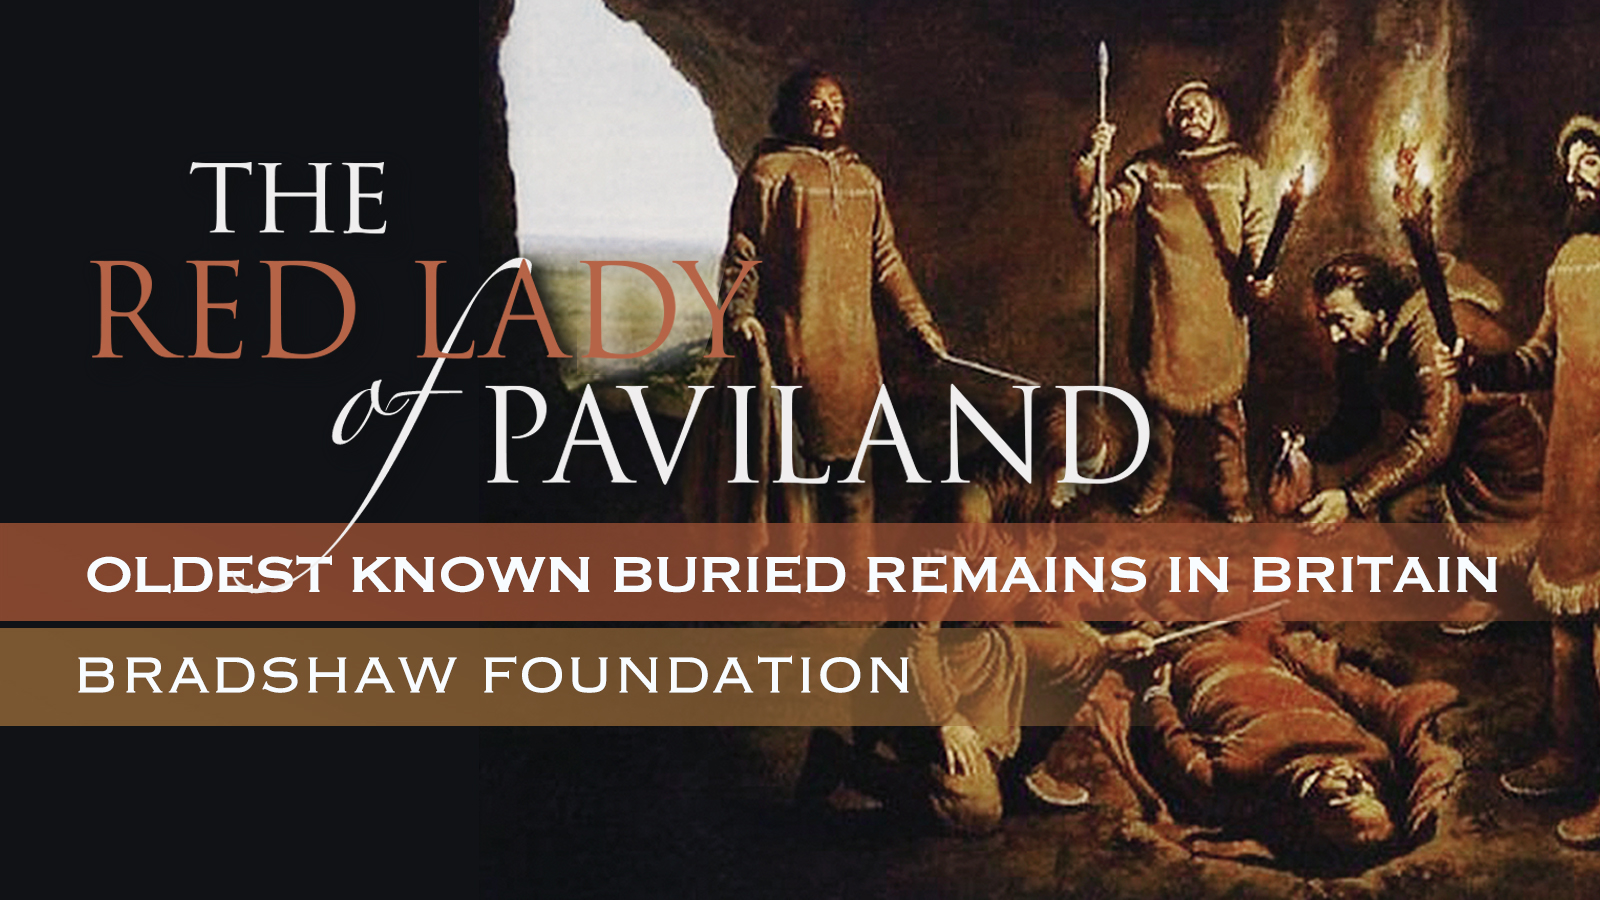 The Red Lady of Paviland